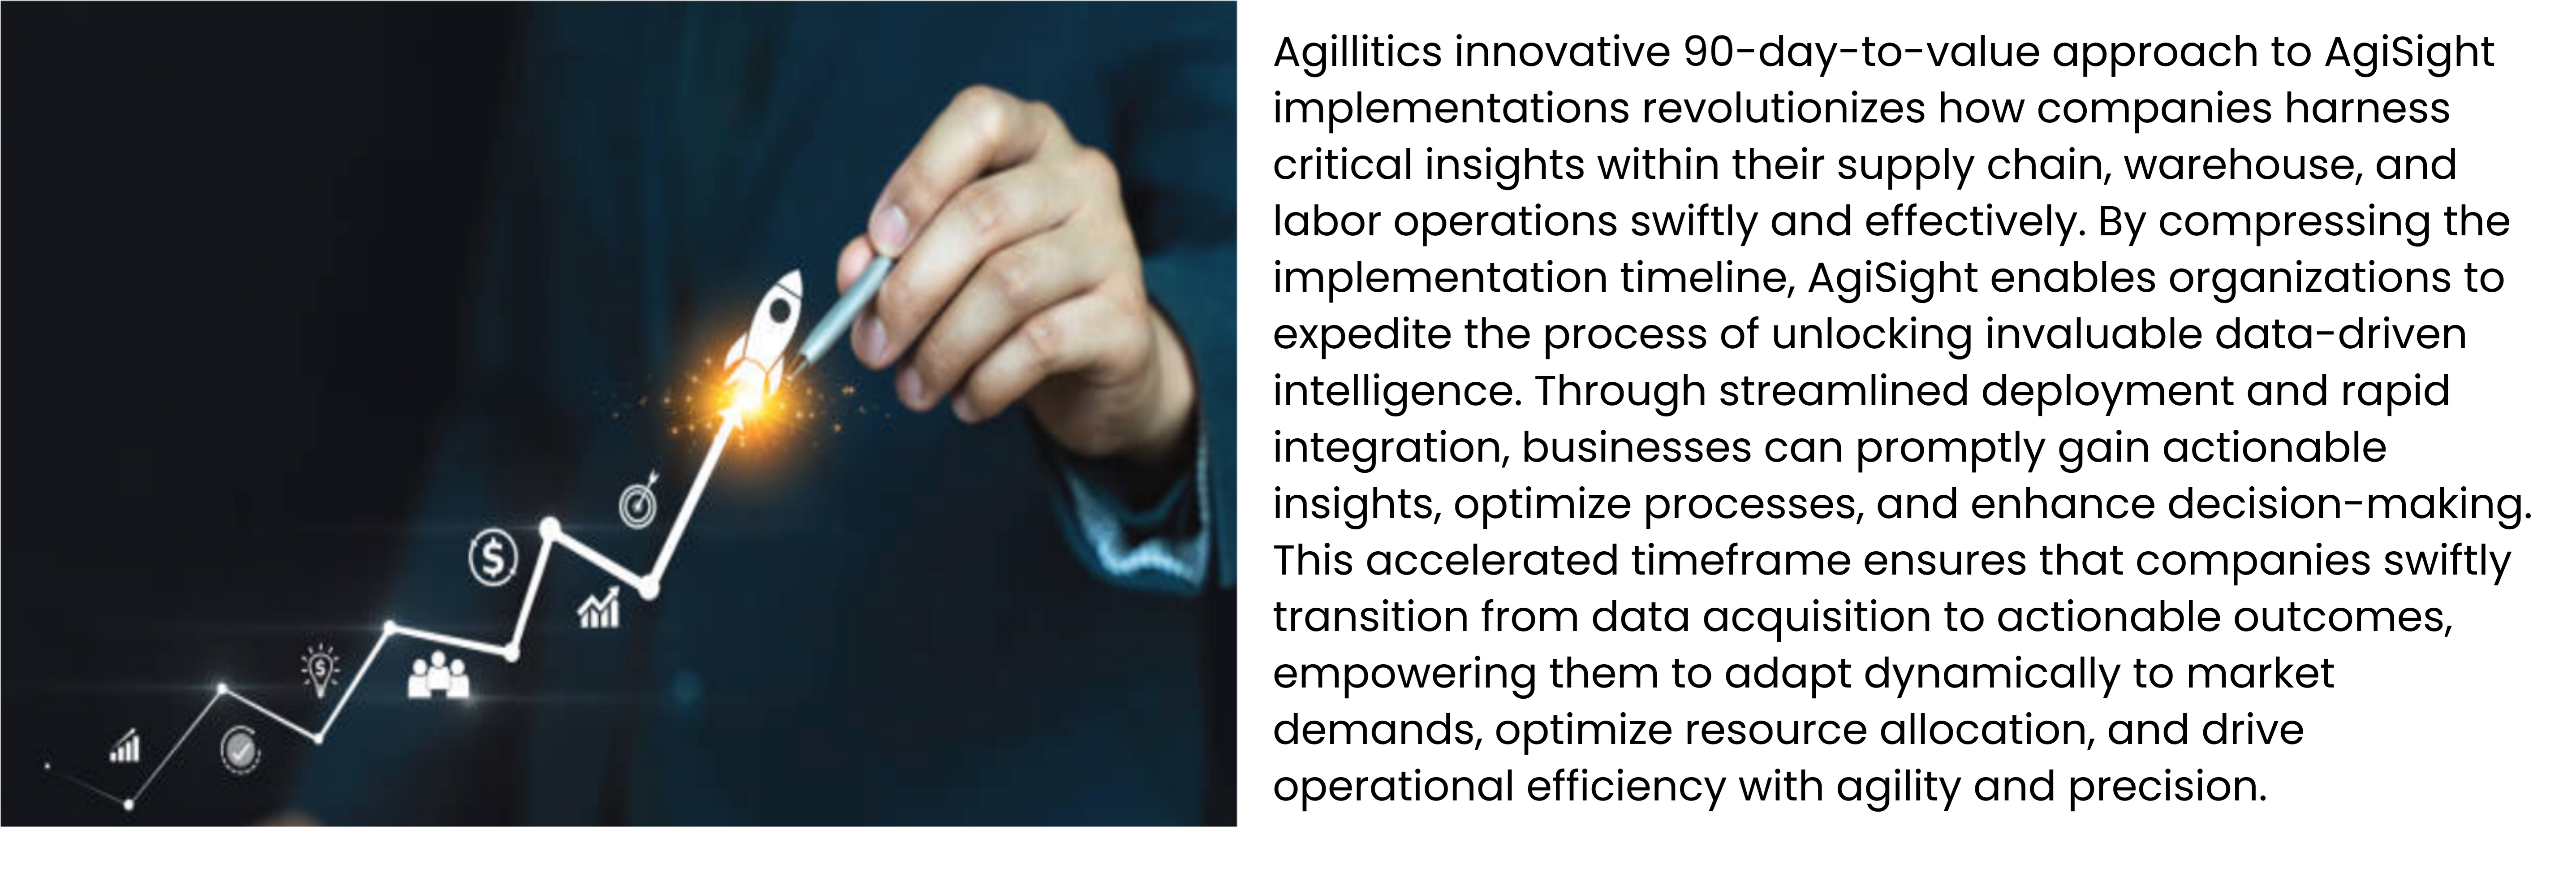 Agillitics innovative 90-day-to-value approach to AgiSight implementations revolutionizes how companies harness critical insights within their supply chain, warehouse, and labor operations swiftly and effectively. By compressing the implementation timeline, AgiSight enables organizations to expedite the process of unlocking invaluable data-driven intelligence. Through streamlined deployment and rapid integration, businesses can promptly gain actionable insights, optimize processes, and enhance decision-making. This accelerated timeframe ensures that companies swiftly transition from data acquisition to actionable outcomes, empowering them to adapt dynamically to market demands, optimize resource allocation, and drive operational efficiency with agility and precision.